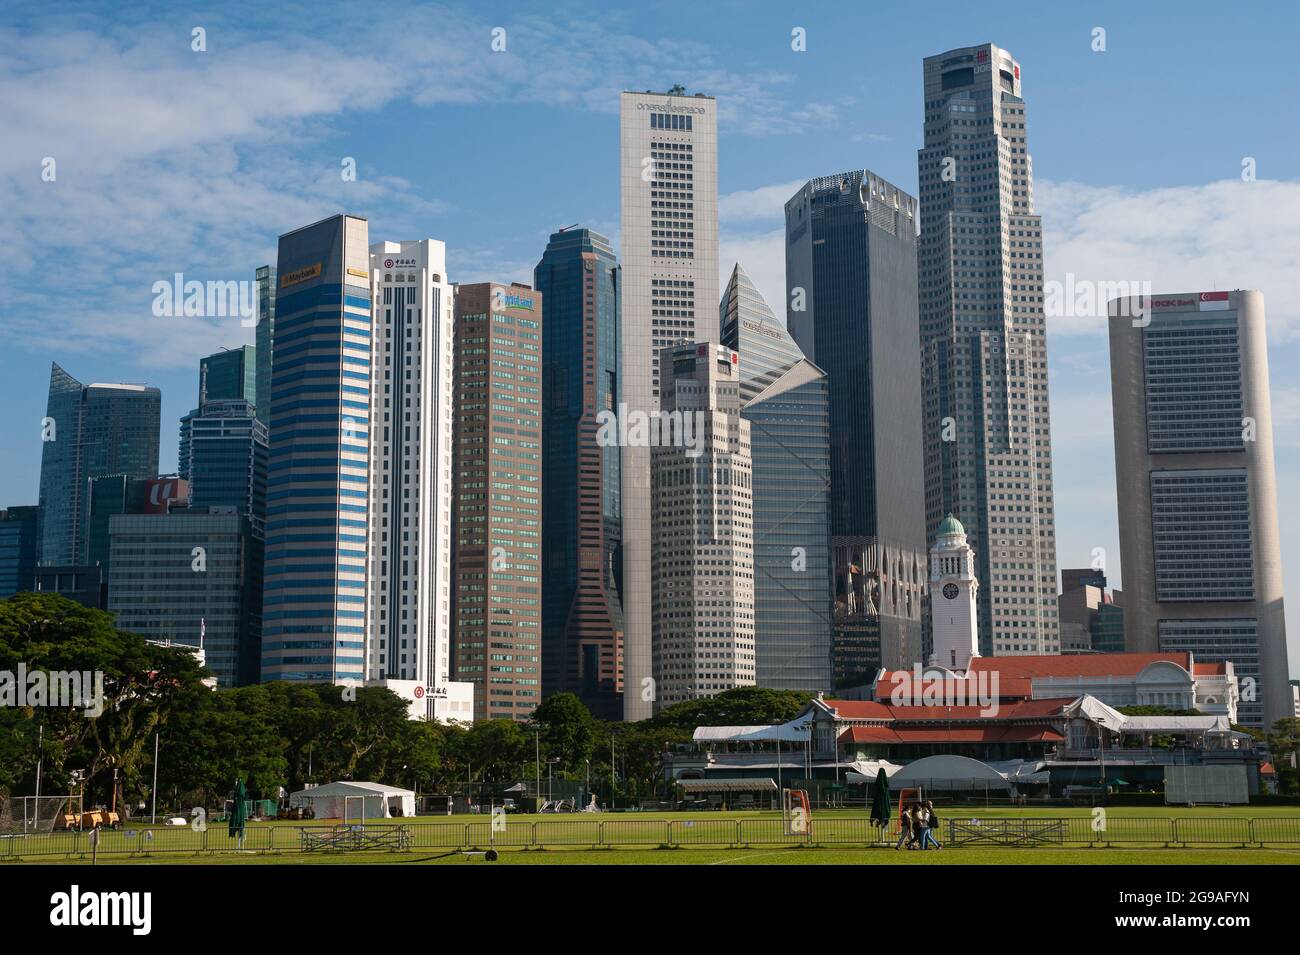 24.07.2021, Singapore, Republic of Singapore, Asia - Cityscape with skyline of the central business district and the skyscrapers around Raffles Place. Stock Photo